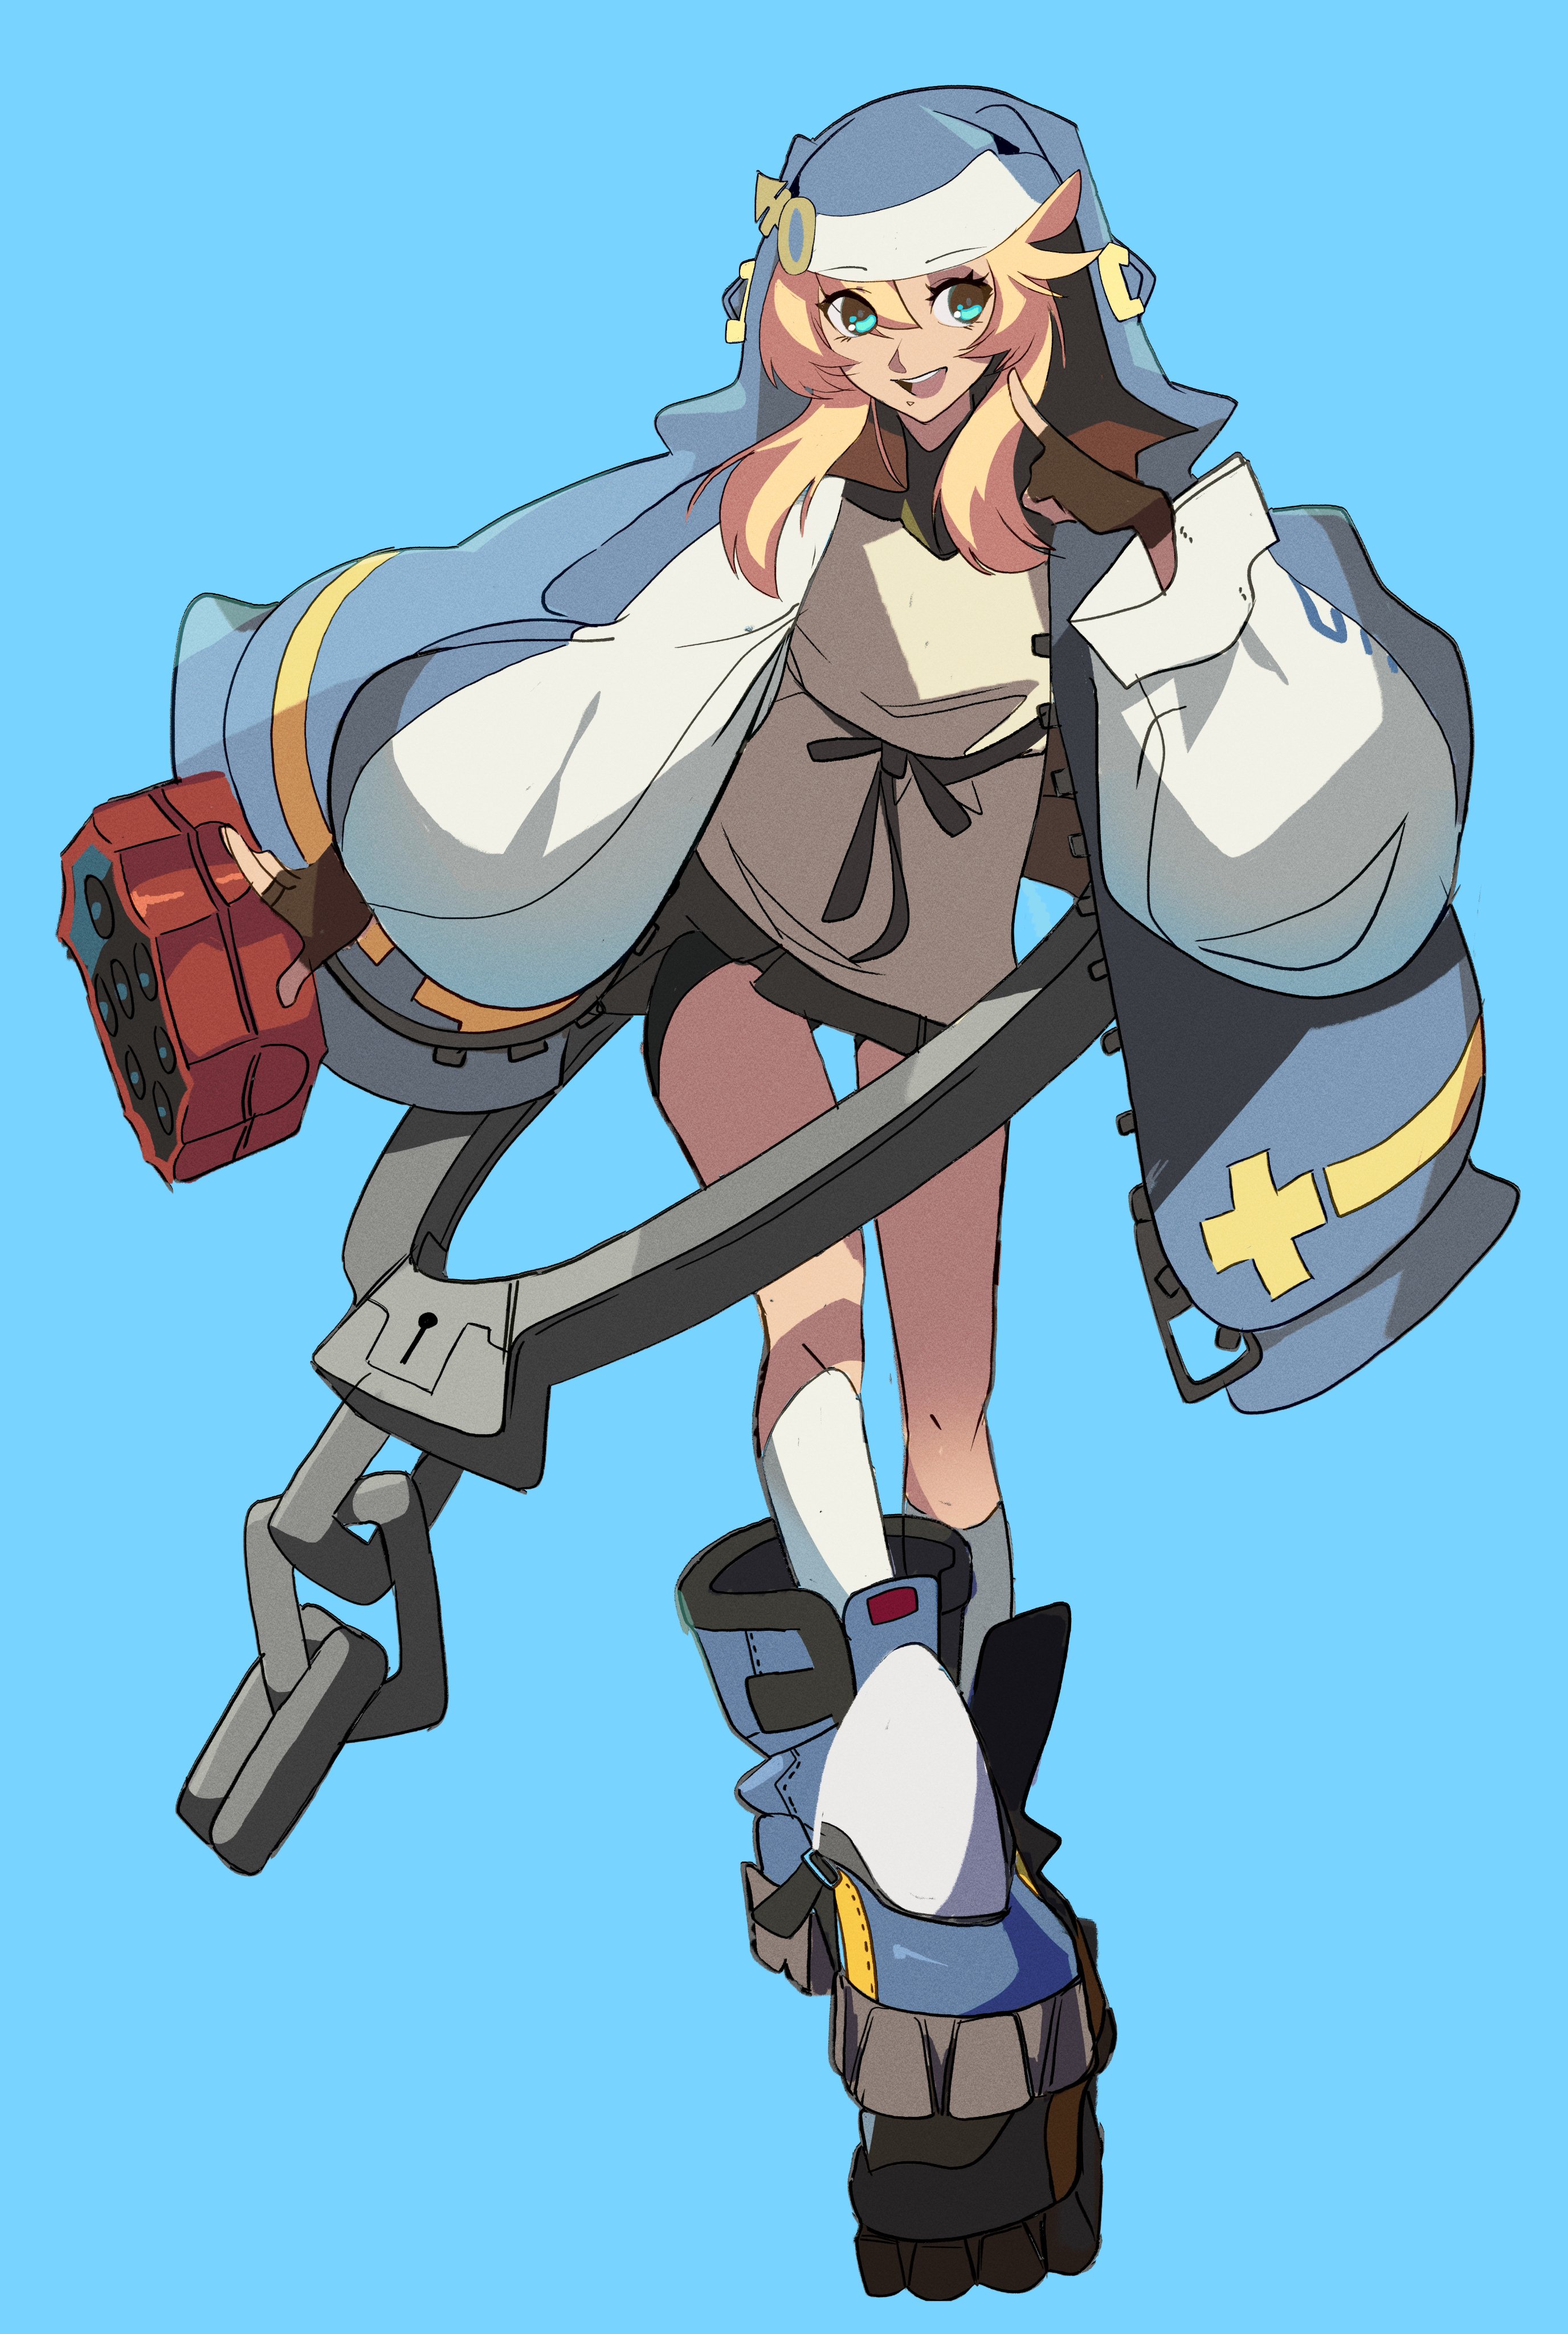 Bridget - Guilty Gear Strive This was the result of my monthly